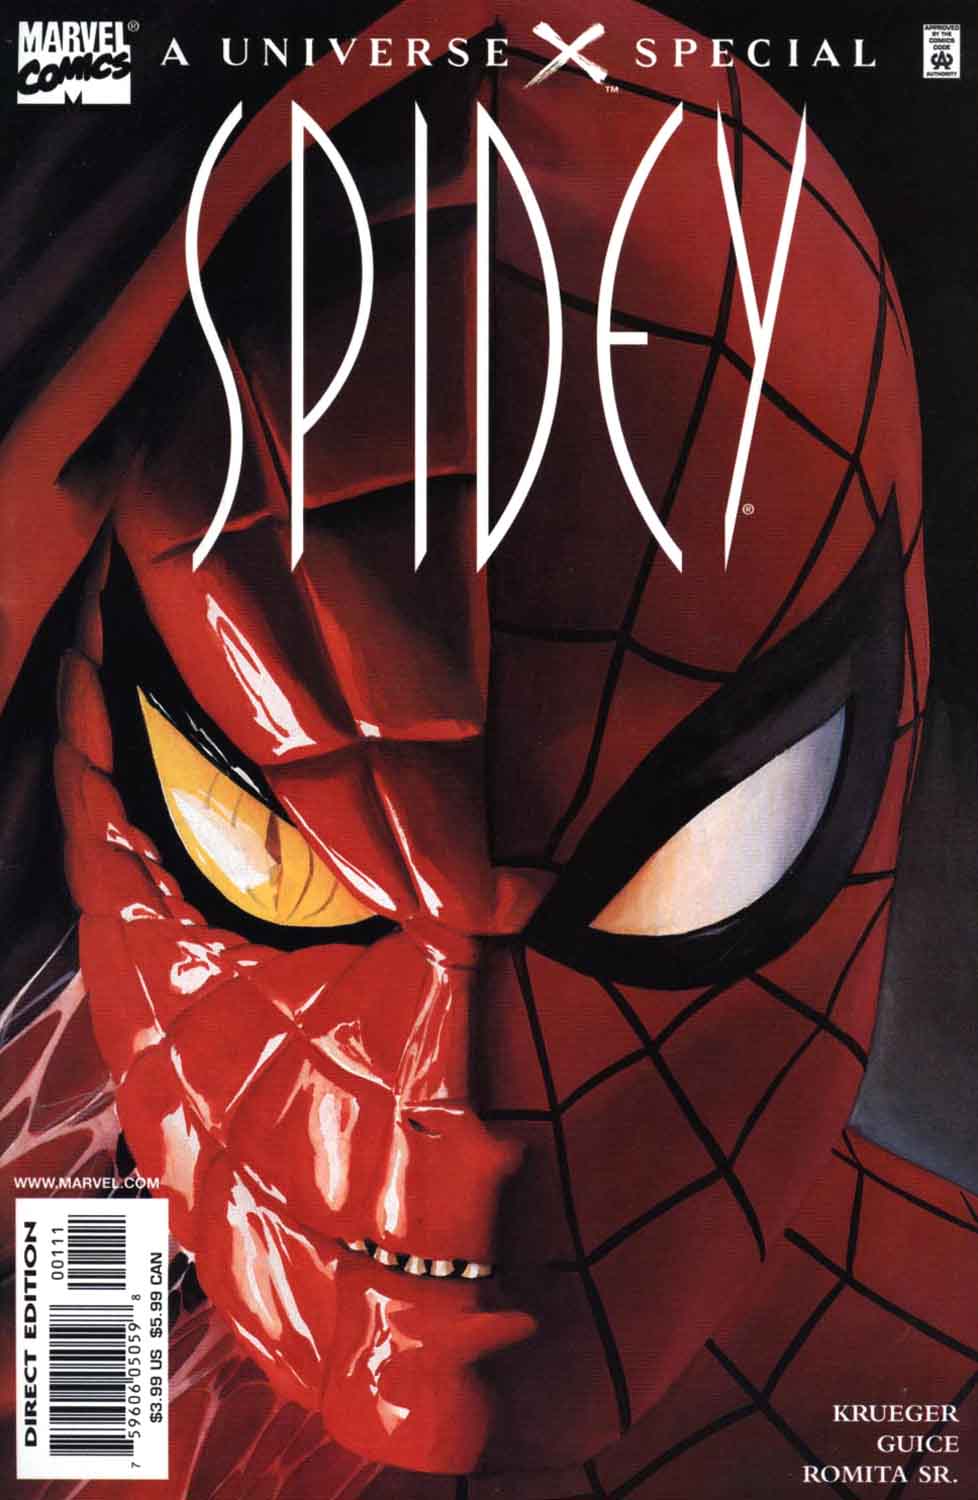 Read online Universe X Special comic -  Issue # Issue Spidey - 1